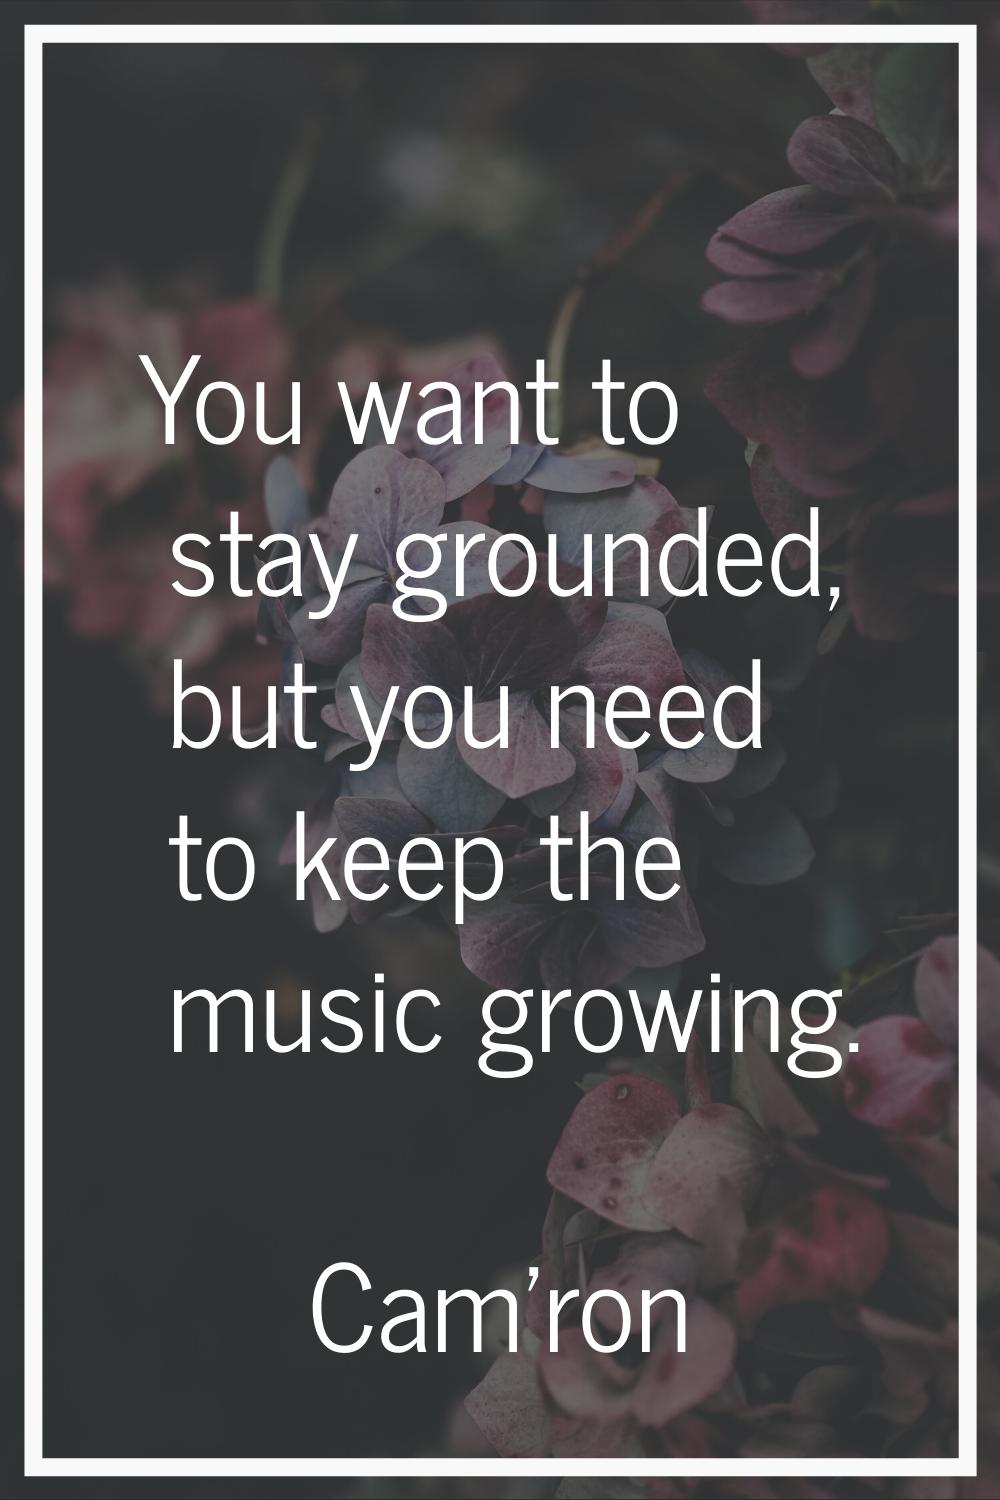 You want to stay grounded, but you need to keep the music growing.